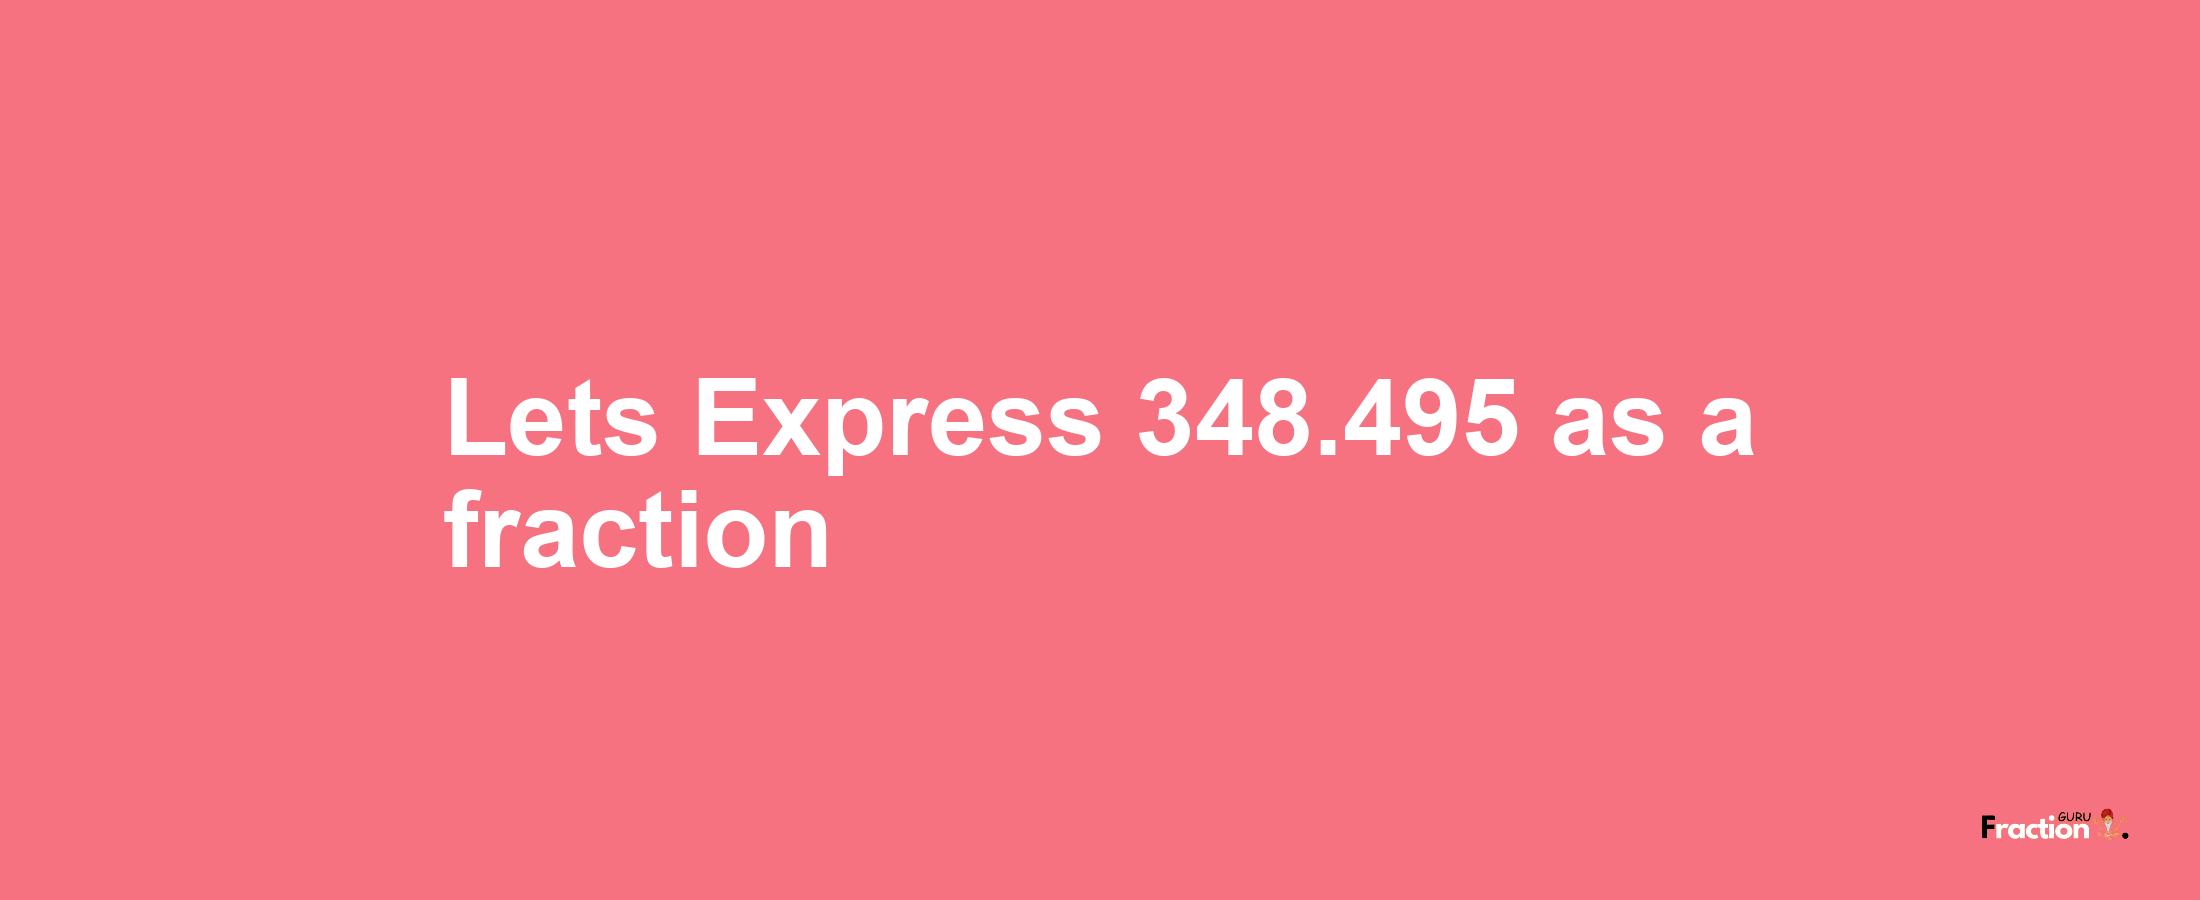 Lets Express 348.495 as afraction